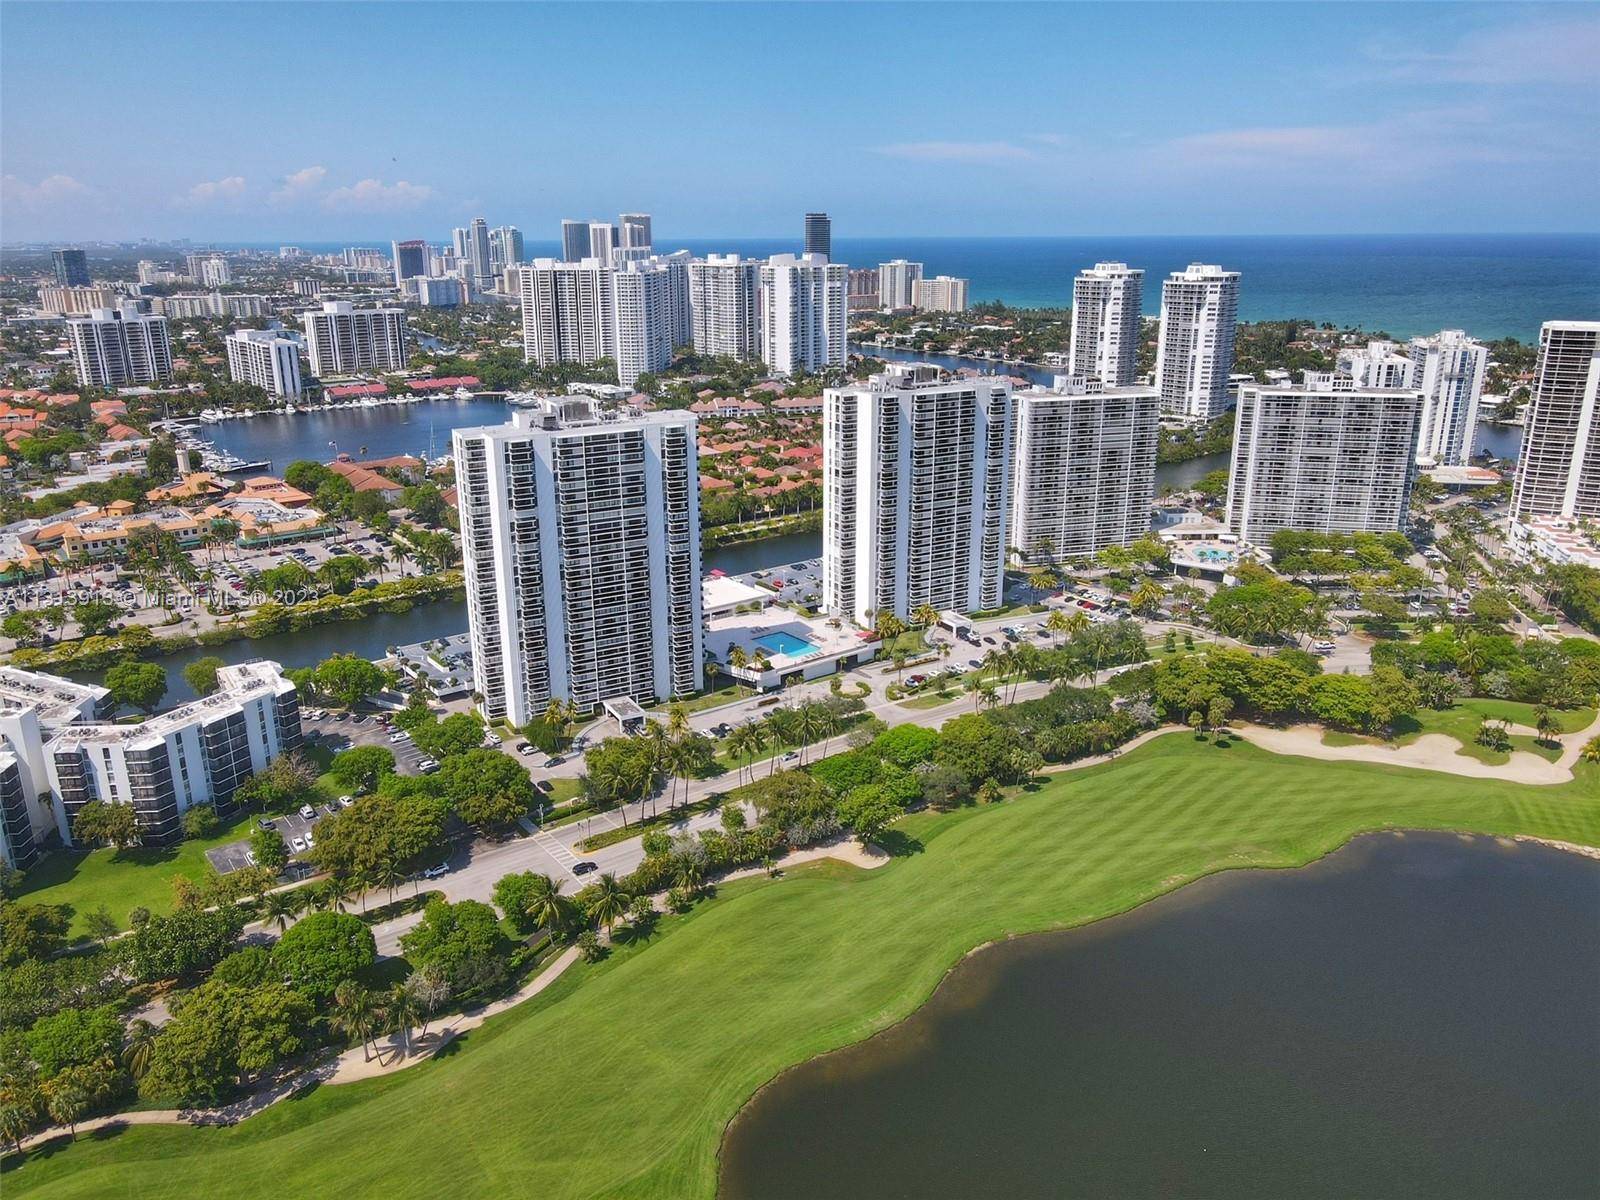 STUNNIG VIEWS LOCATED IN THE HEART OF AVENTURA 2 FULL BEDROOM AND 2 BATHS, LAKE AND GOLF COURSE VIEW IN ONE OF THE BEST LOCATIONS.